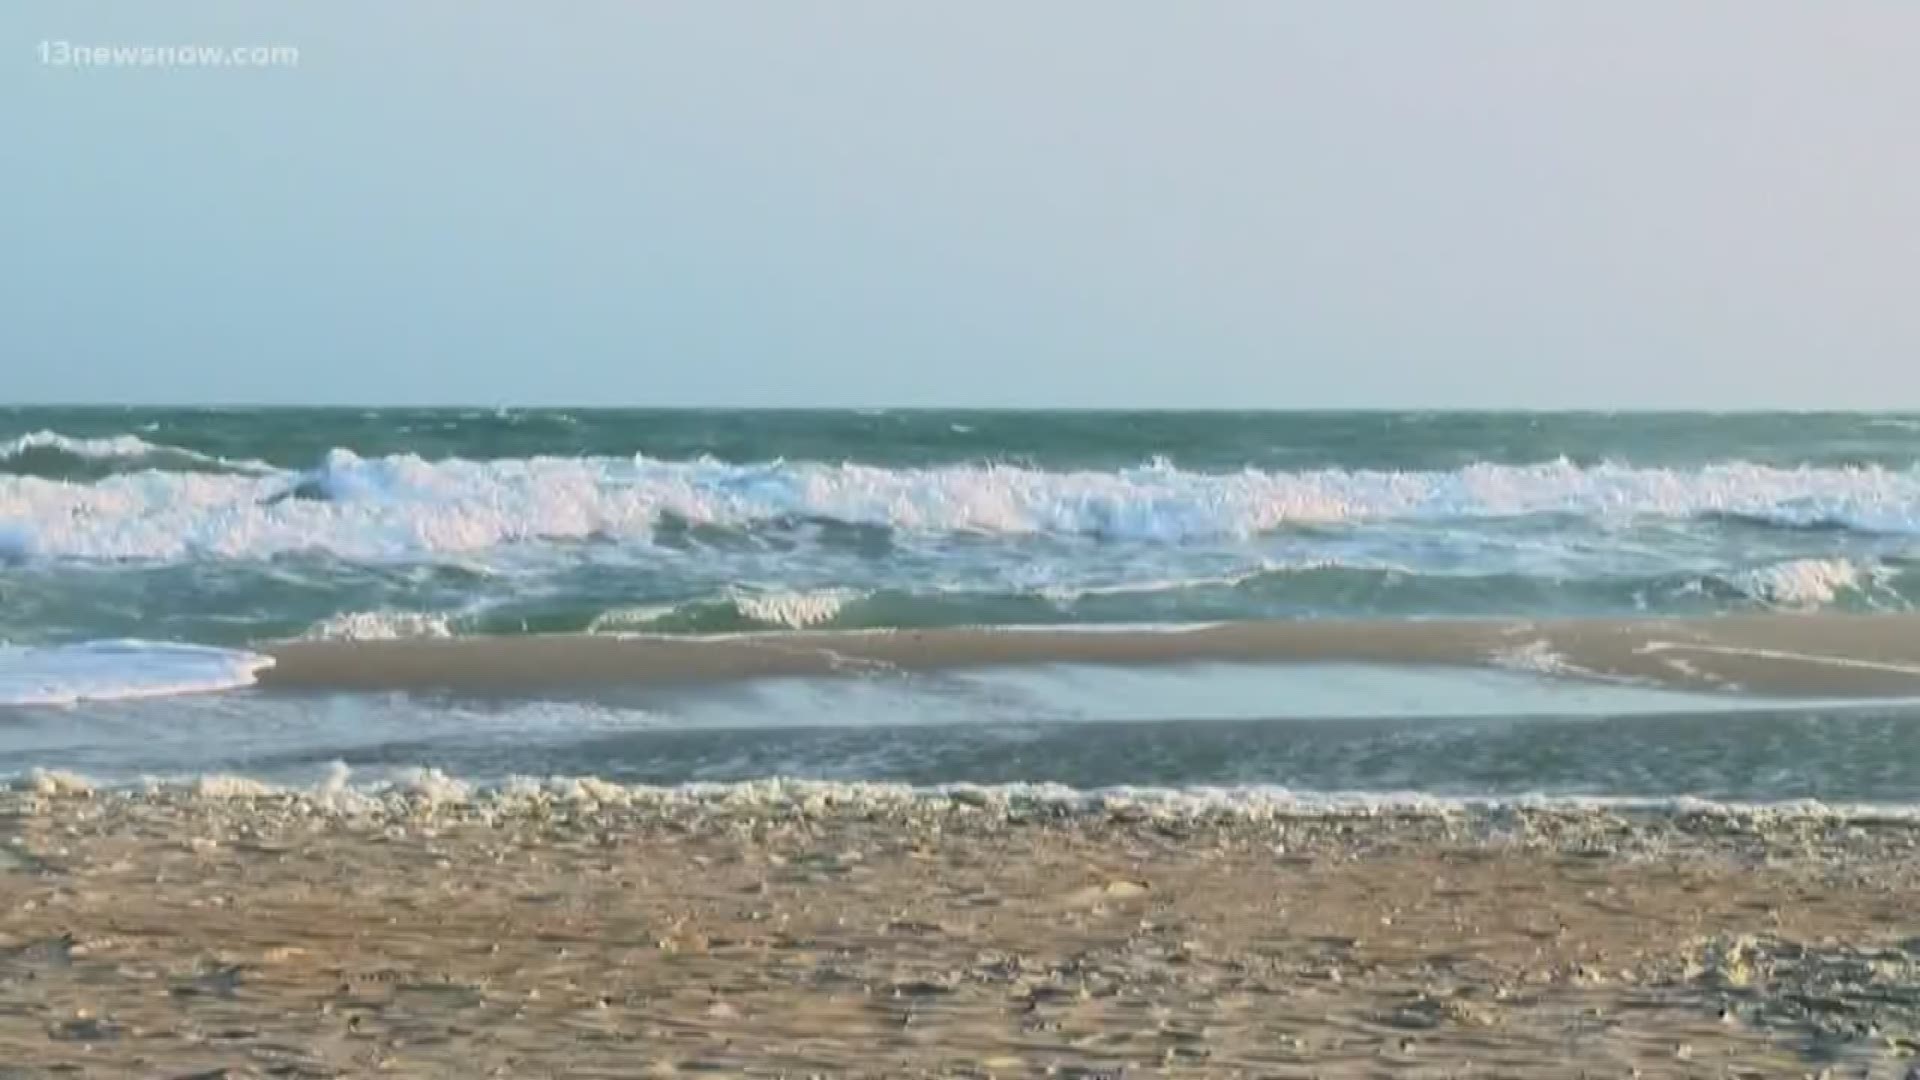 A man was with his family in North Carolina when a wave crashed into him causing him to hit his head on the sand and break his neck. According to officials, it's important to respect the ocean whenever you're at the beach.